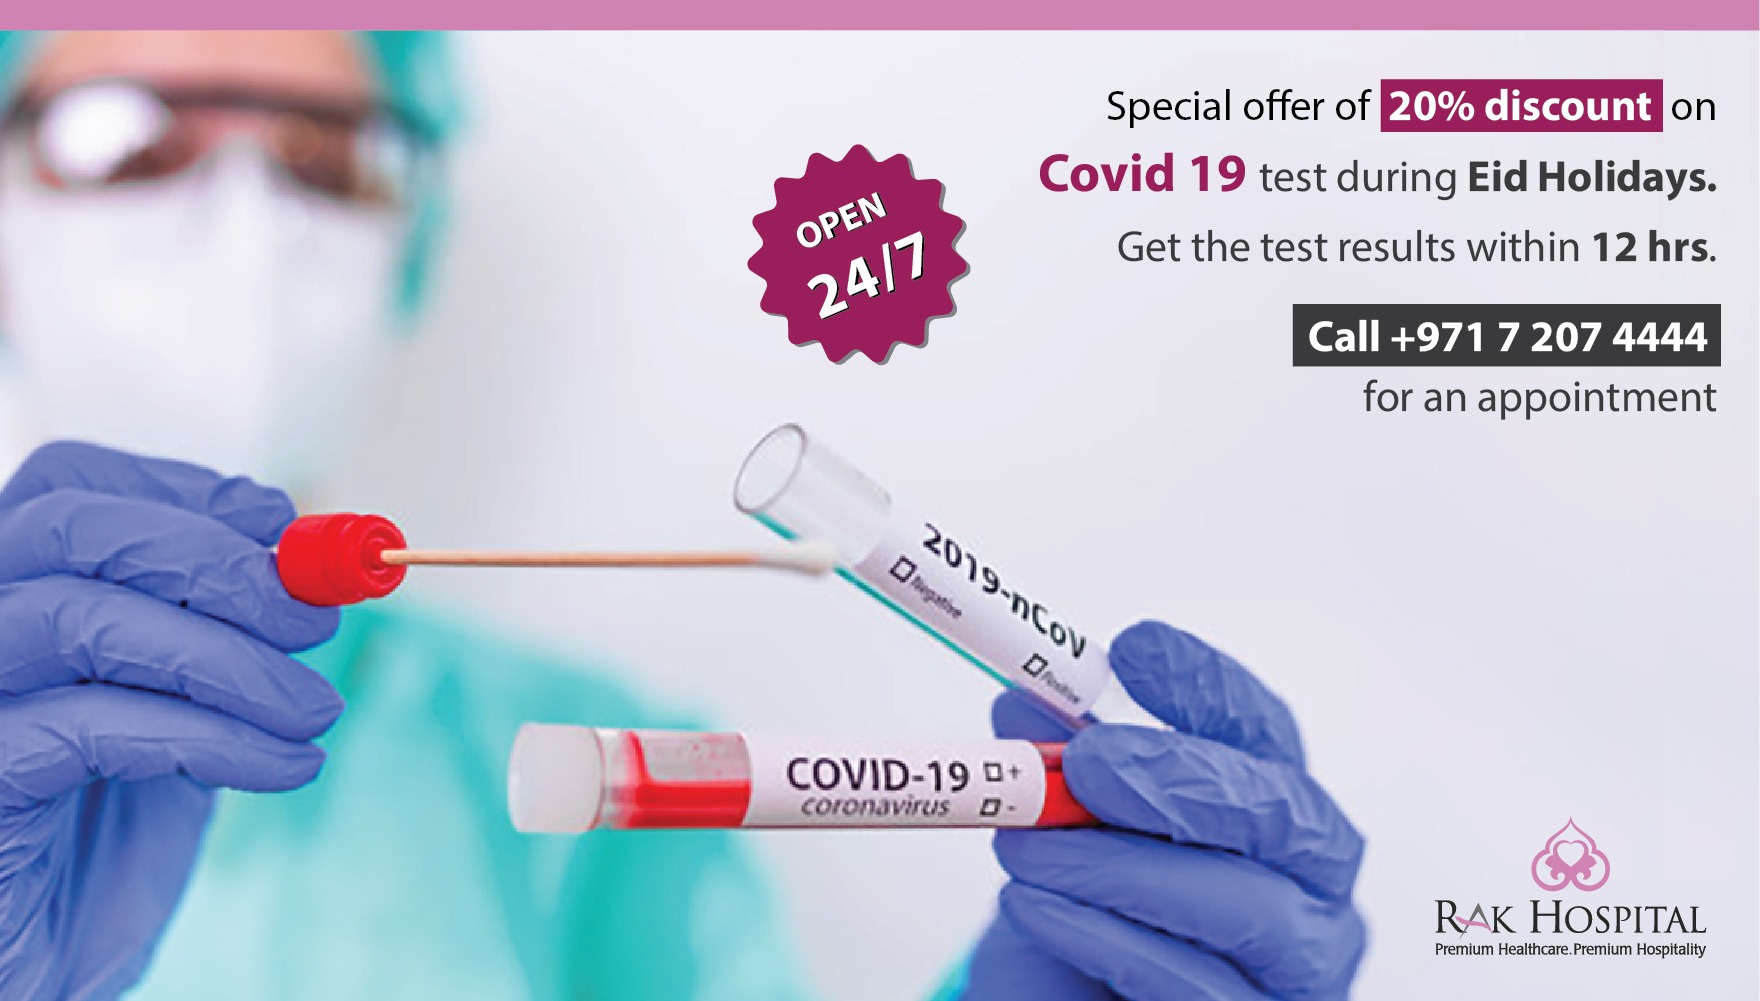 Special offer of 20% discount on Covid 19 Test during Eid Holidays.